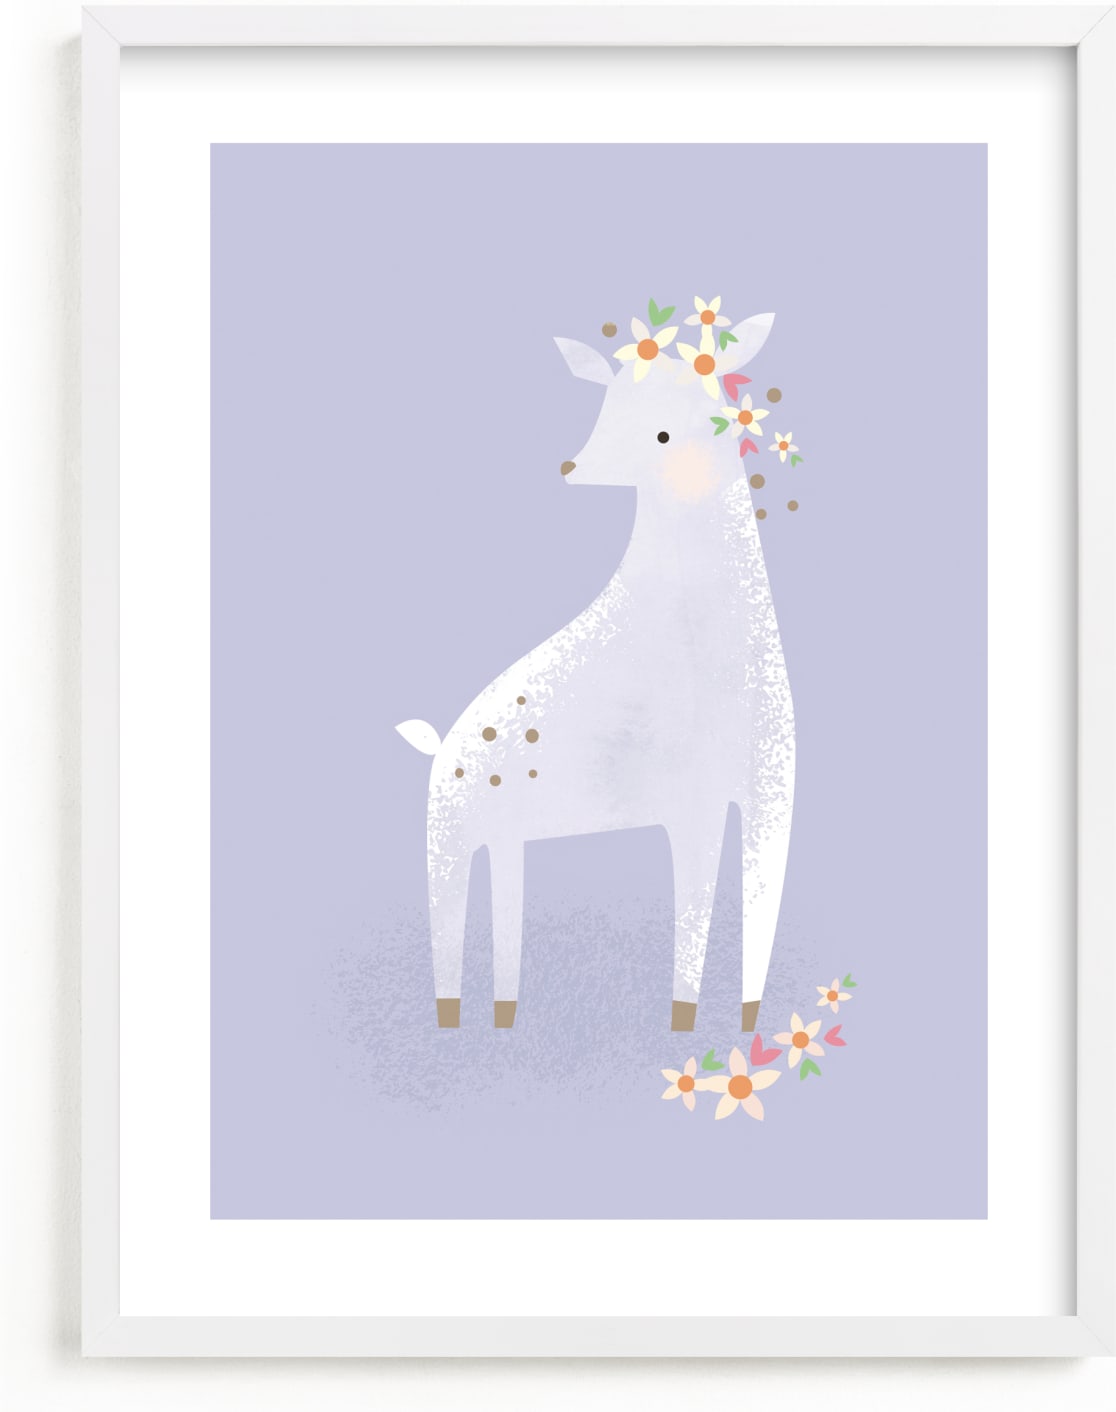 This is a purple kids wall art by Lori Wemple called Little Deer.